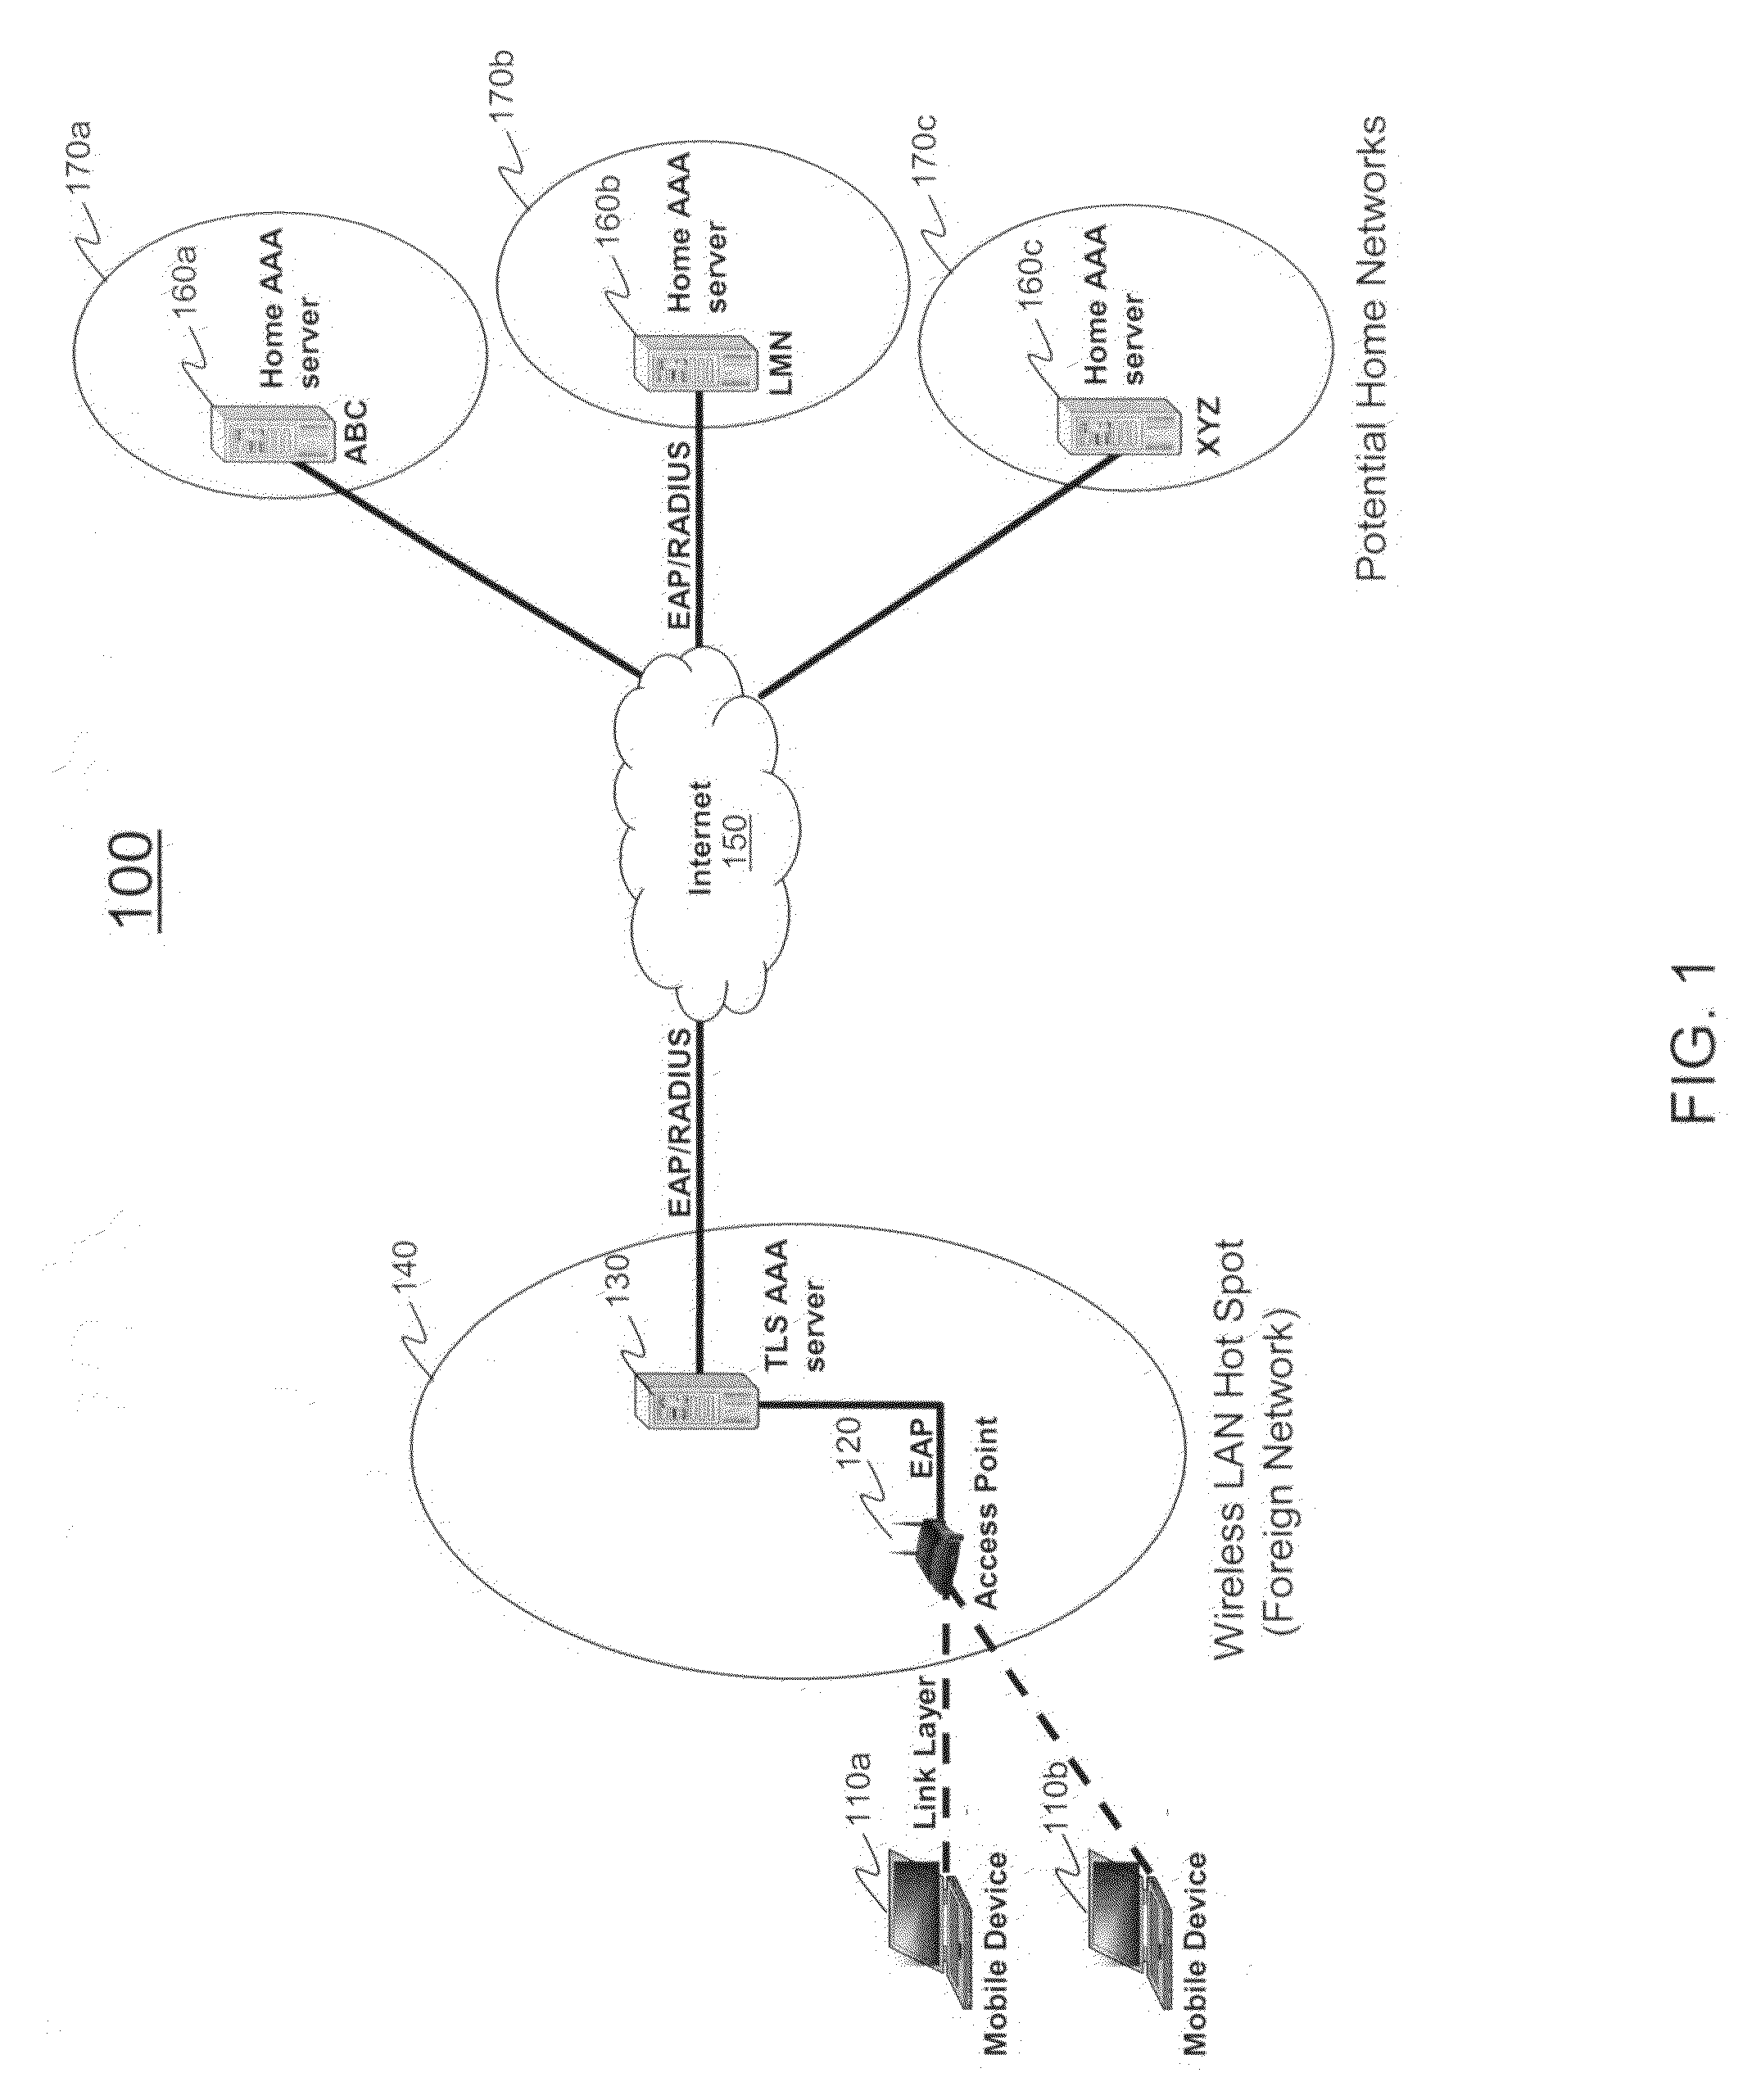 Methods for authenticating and authorizing a mobile device using tunneled extensible authentication protocol